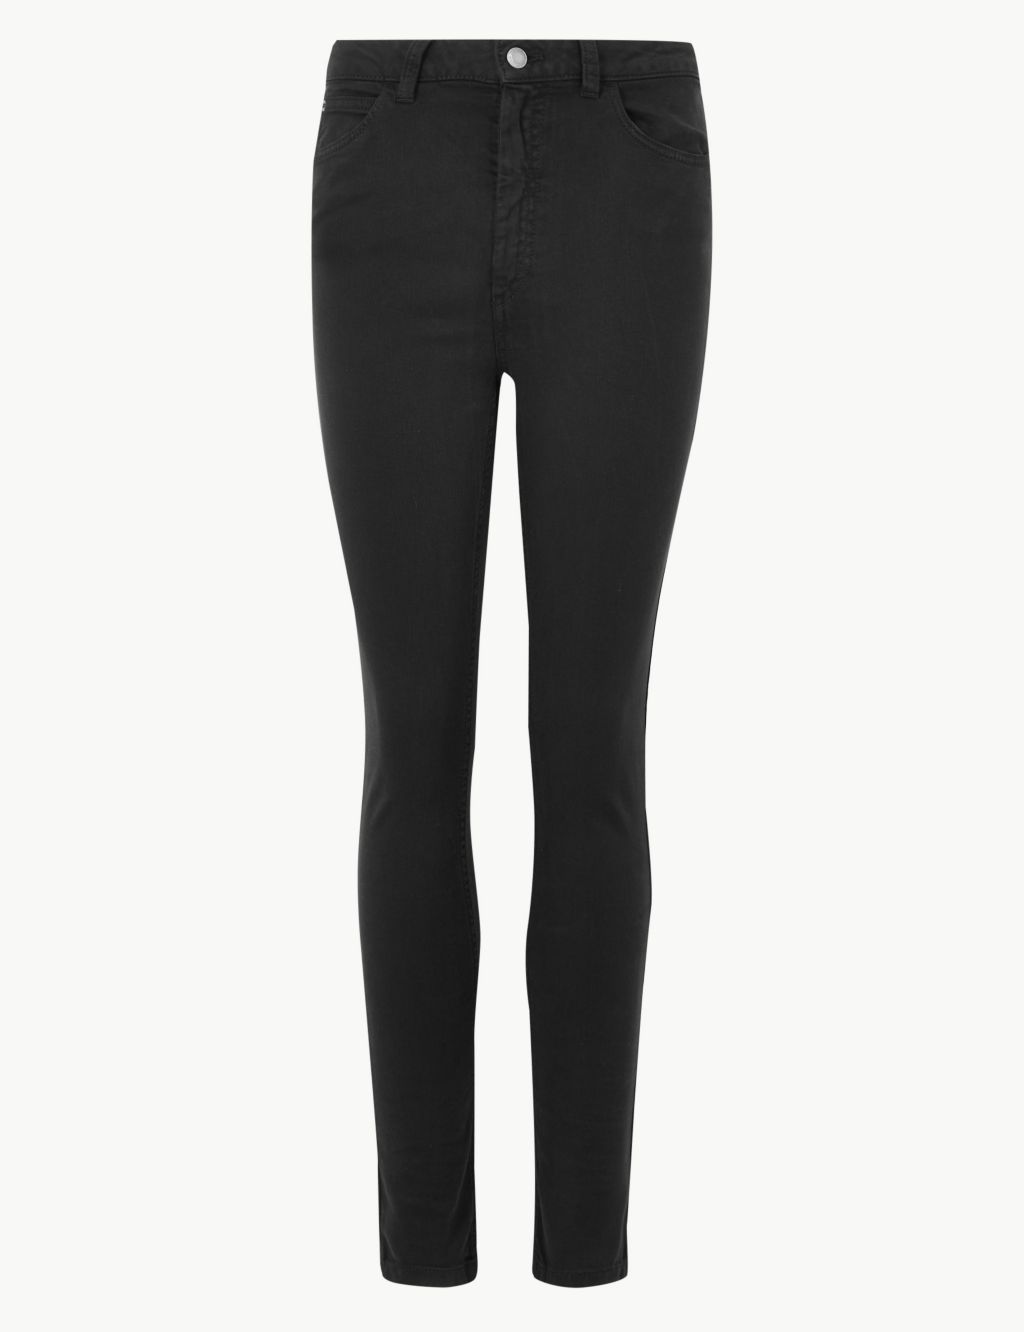 Super Skinny Ankle Grazer Jeans | M&S Collection | M&S